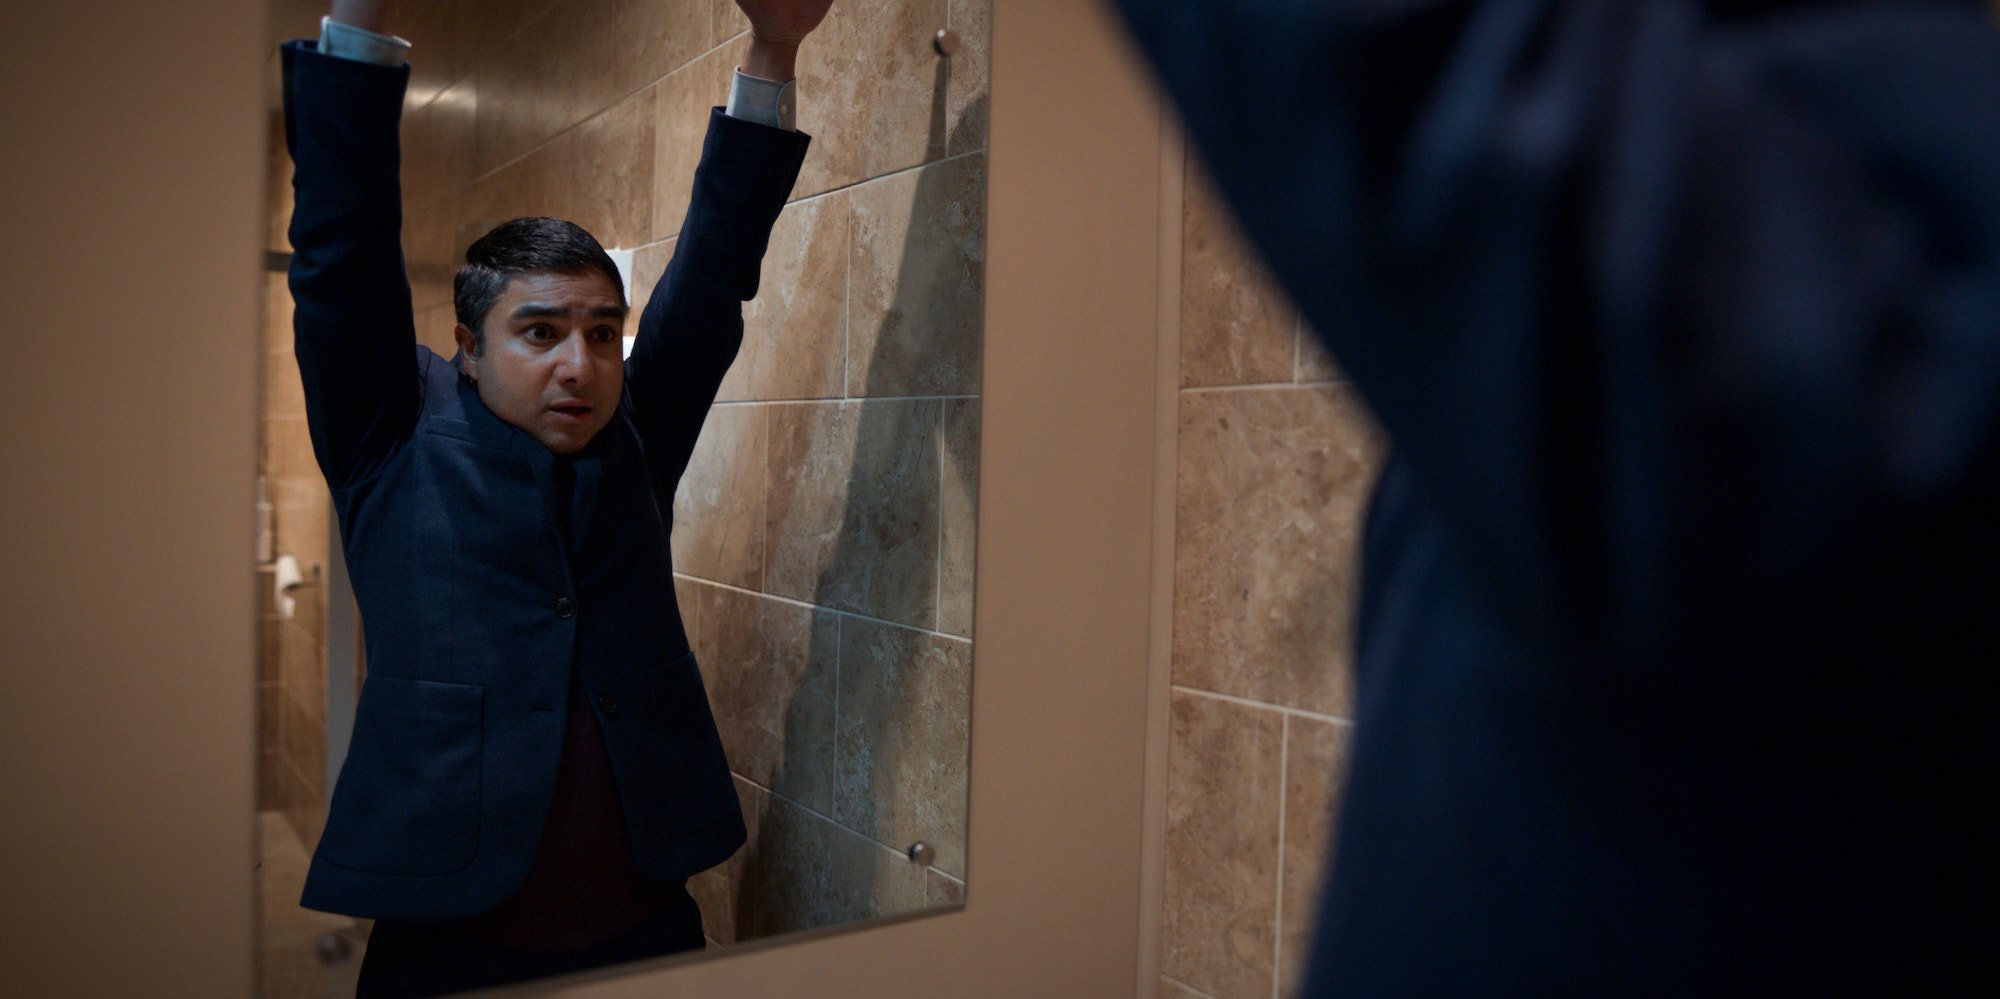 Nate Shelley, played by Nick Mohammed, raising his hands and looking in a mirror in a production still from 'Ted Lasso' Season 2